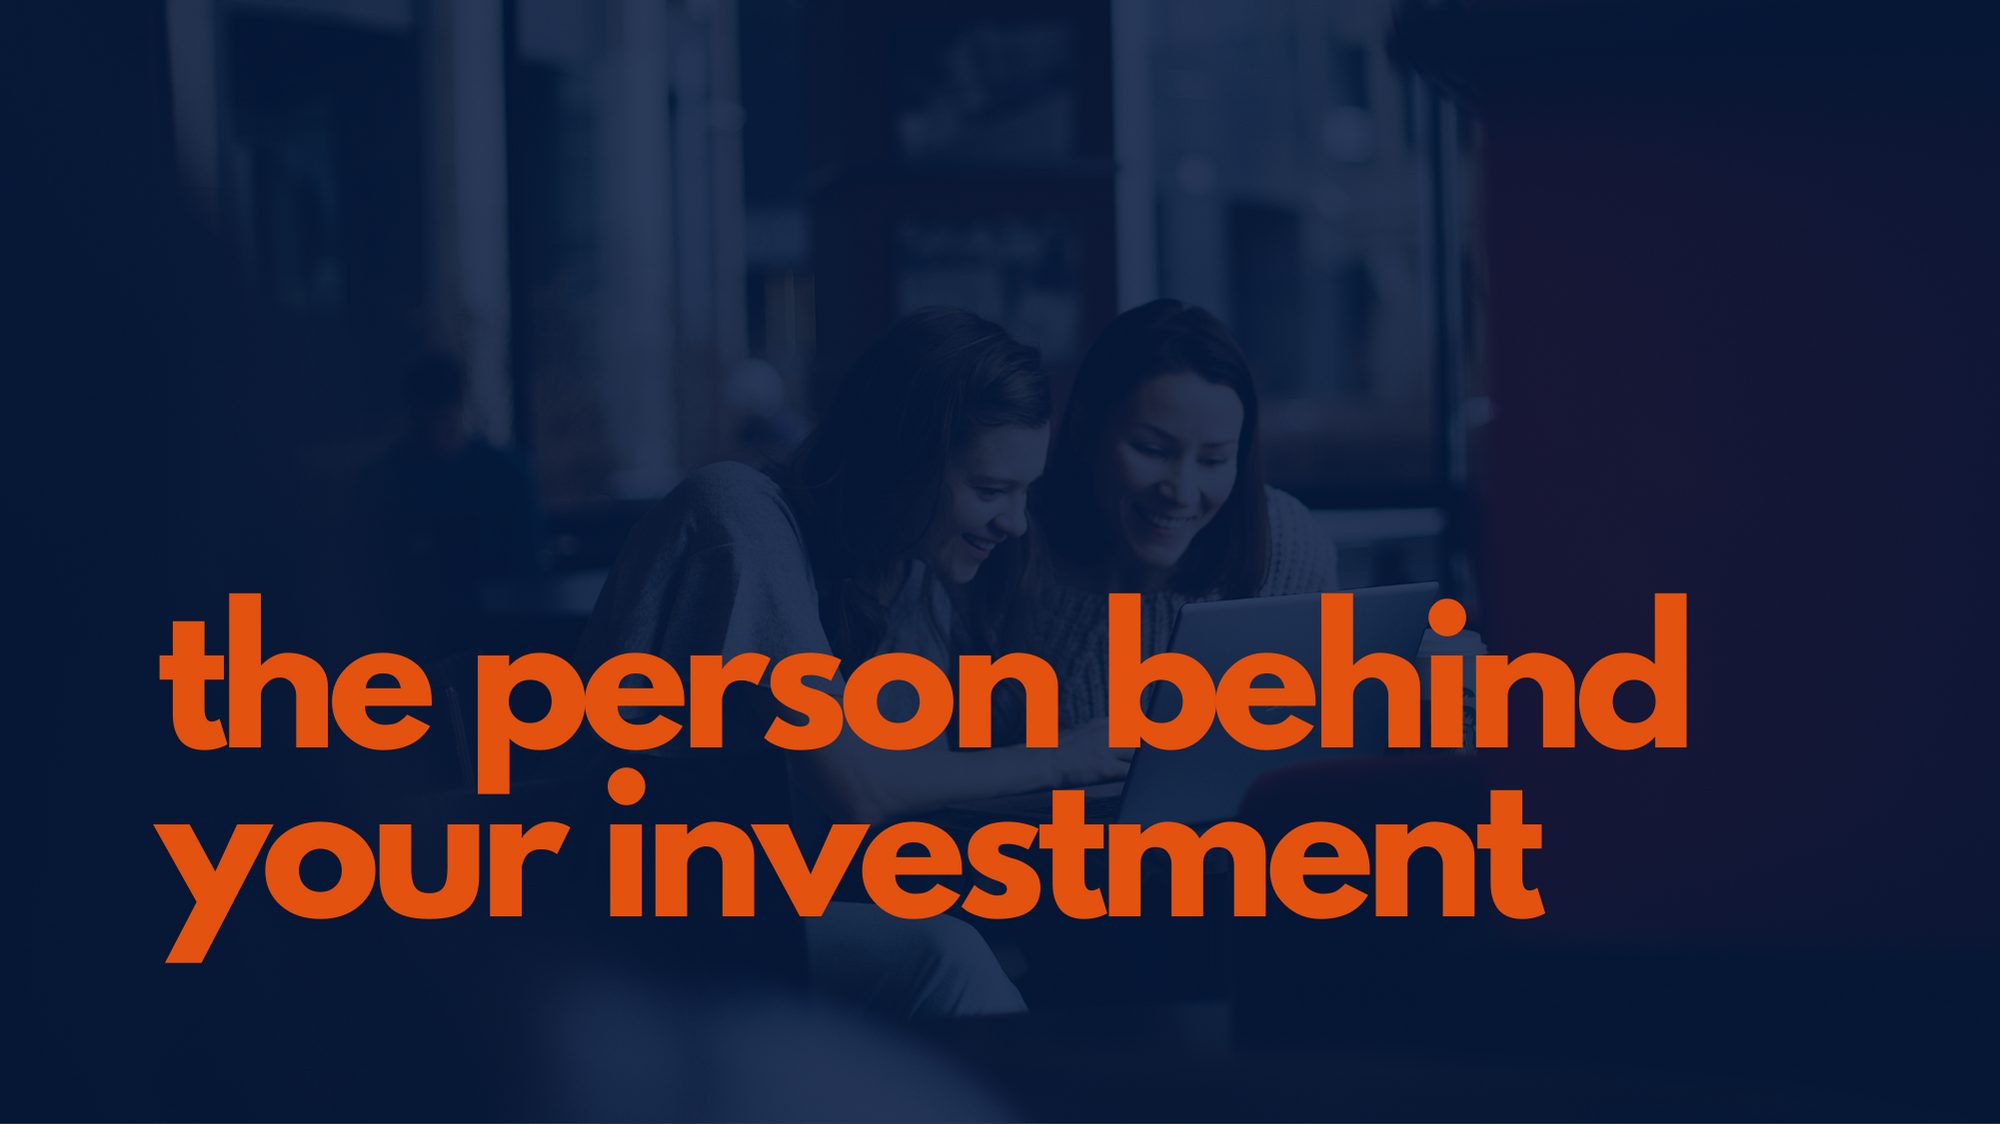 The person behind your investment